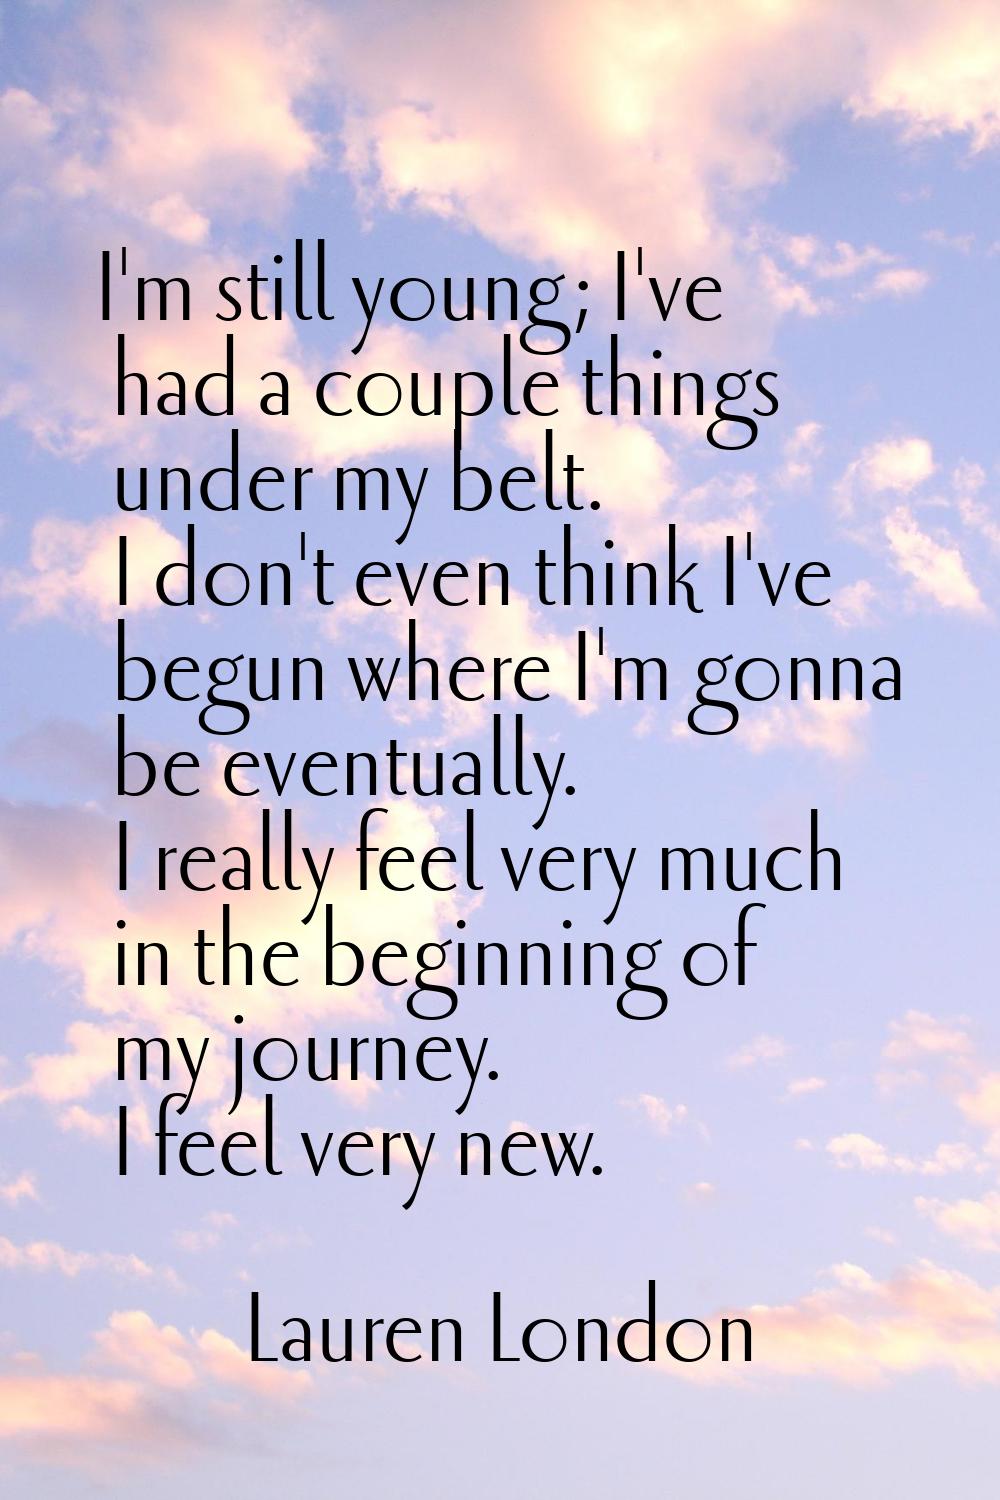 I'm still young; I've had a couple things under my belt. I don't even think I've begun where I'm go